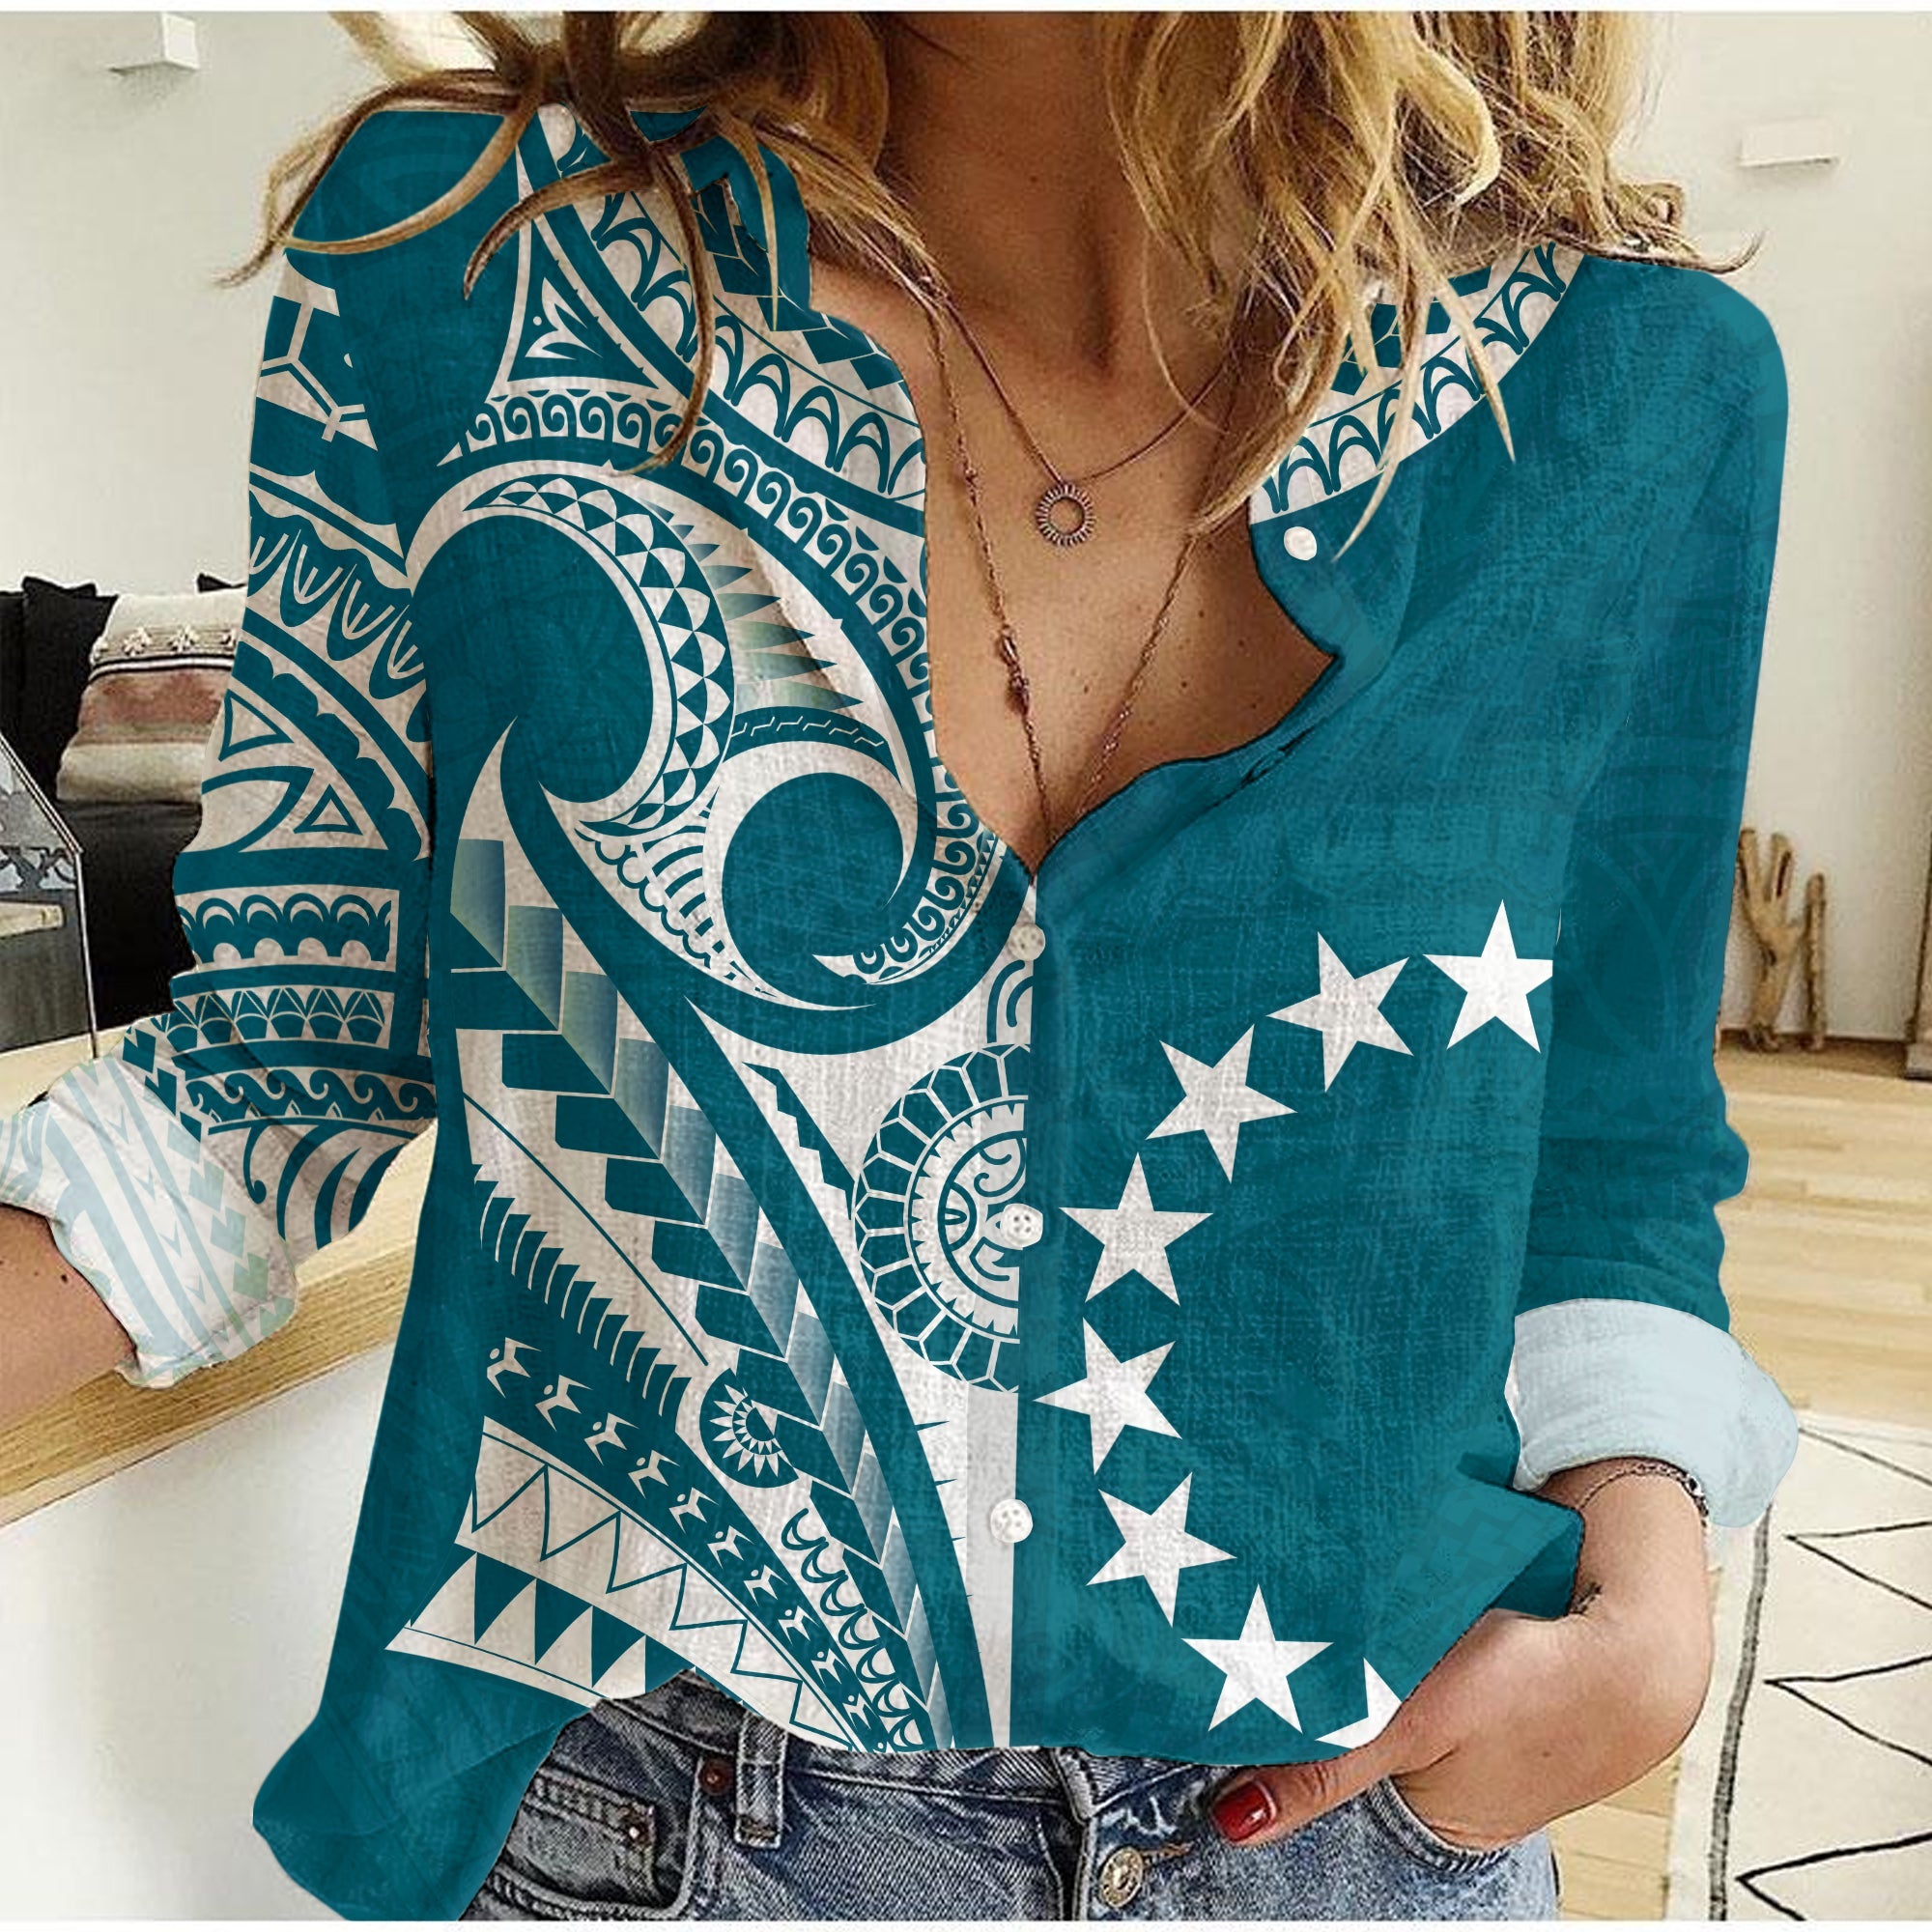 (Custom Text and Number) Cook Islands Tatau Women Casual Shirt Symbolize Passion Stars Version Blue LT13 Female Blue - Polynesian Pride